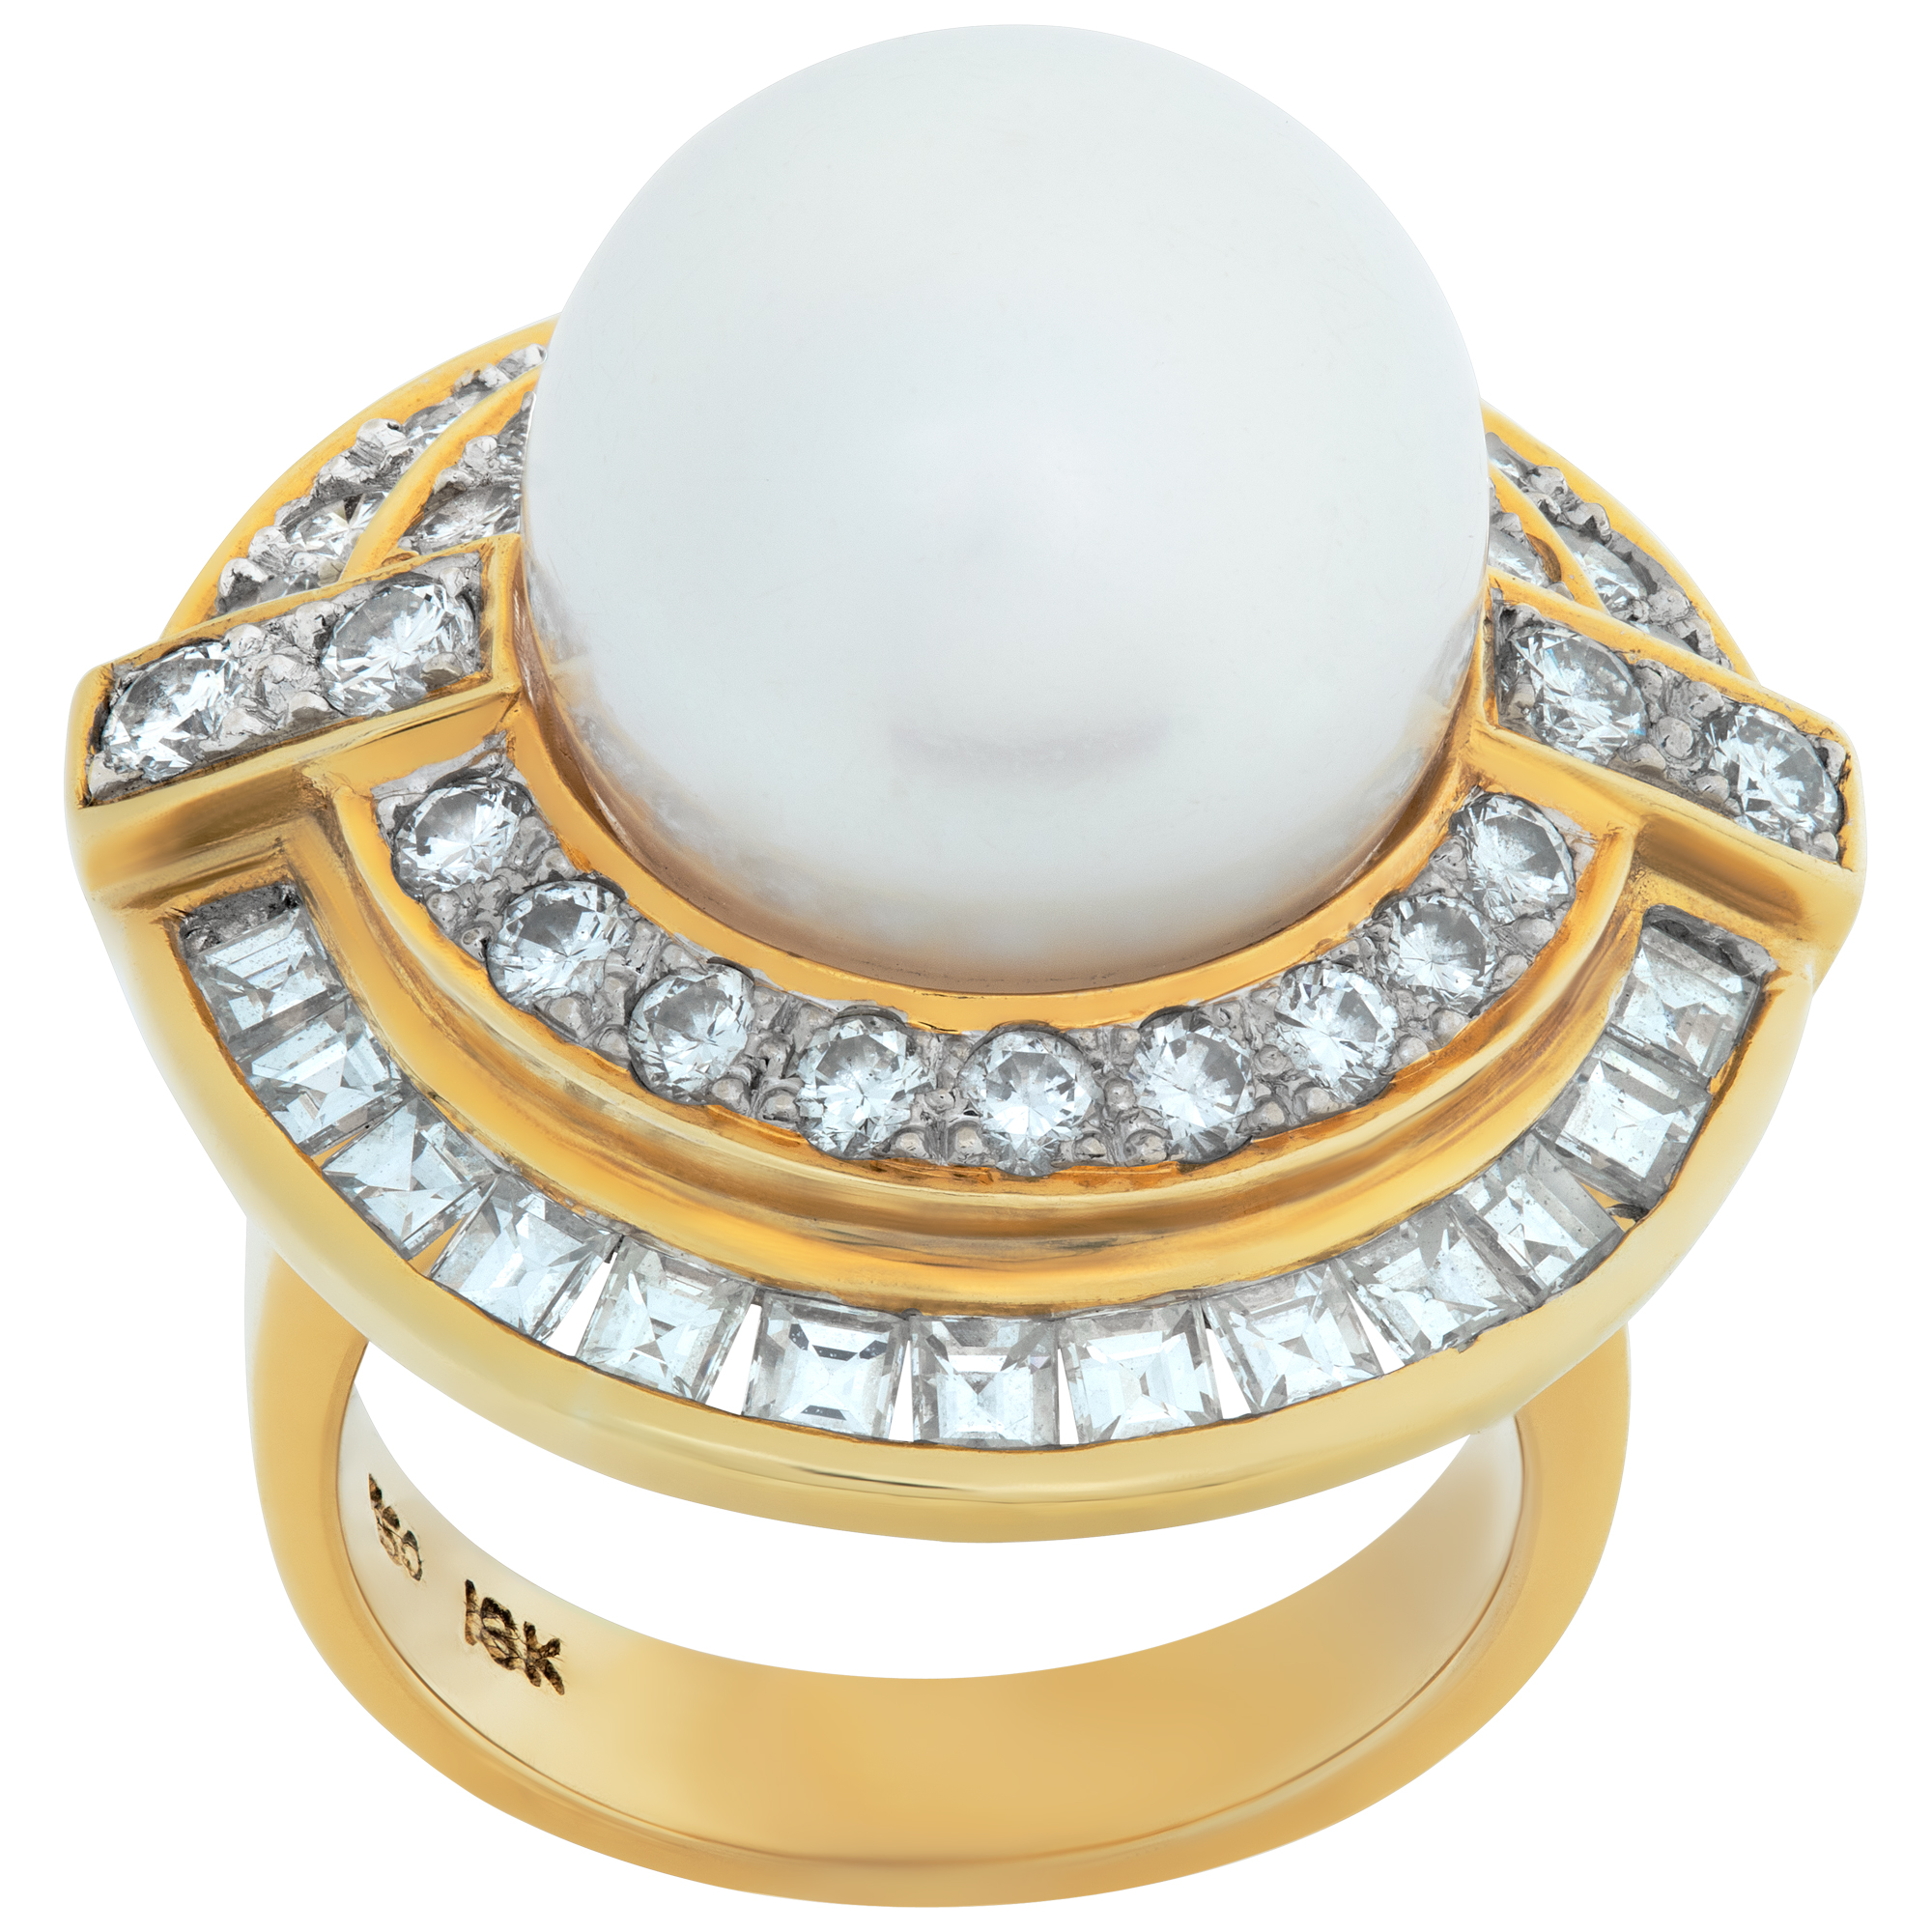 South sea pearl & diamonds ring set in 18K. Round brilliant and princess cut diamonds total approx. weight: 2.22 carats image 1